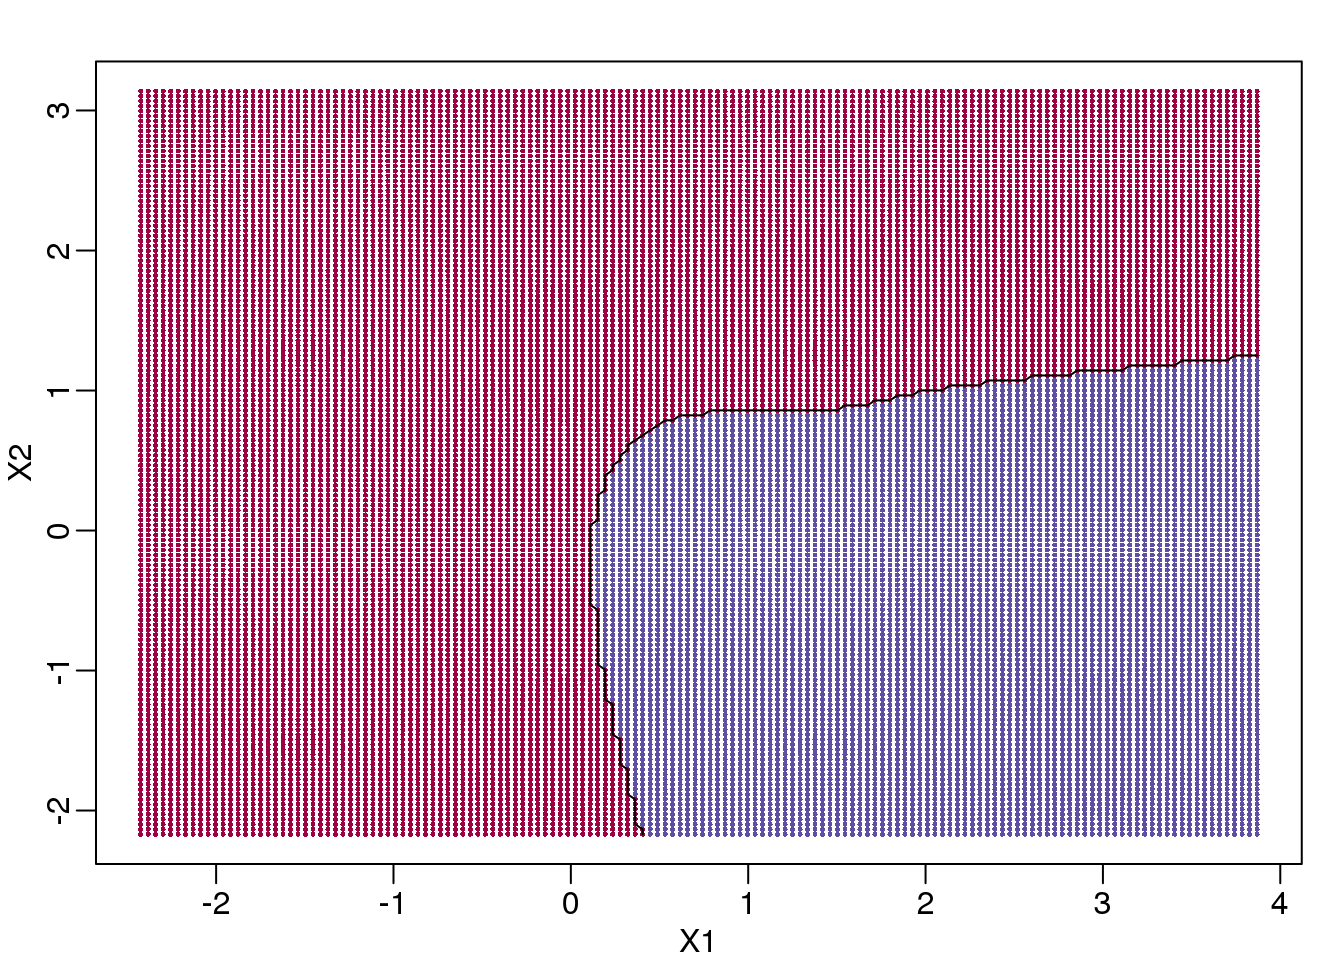 Bayes rule. The line divides part of the space for which probability is larger than 0.5 (red) and lower than 0.5 (blue).